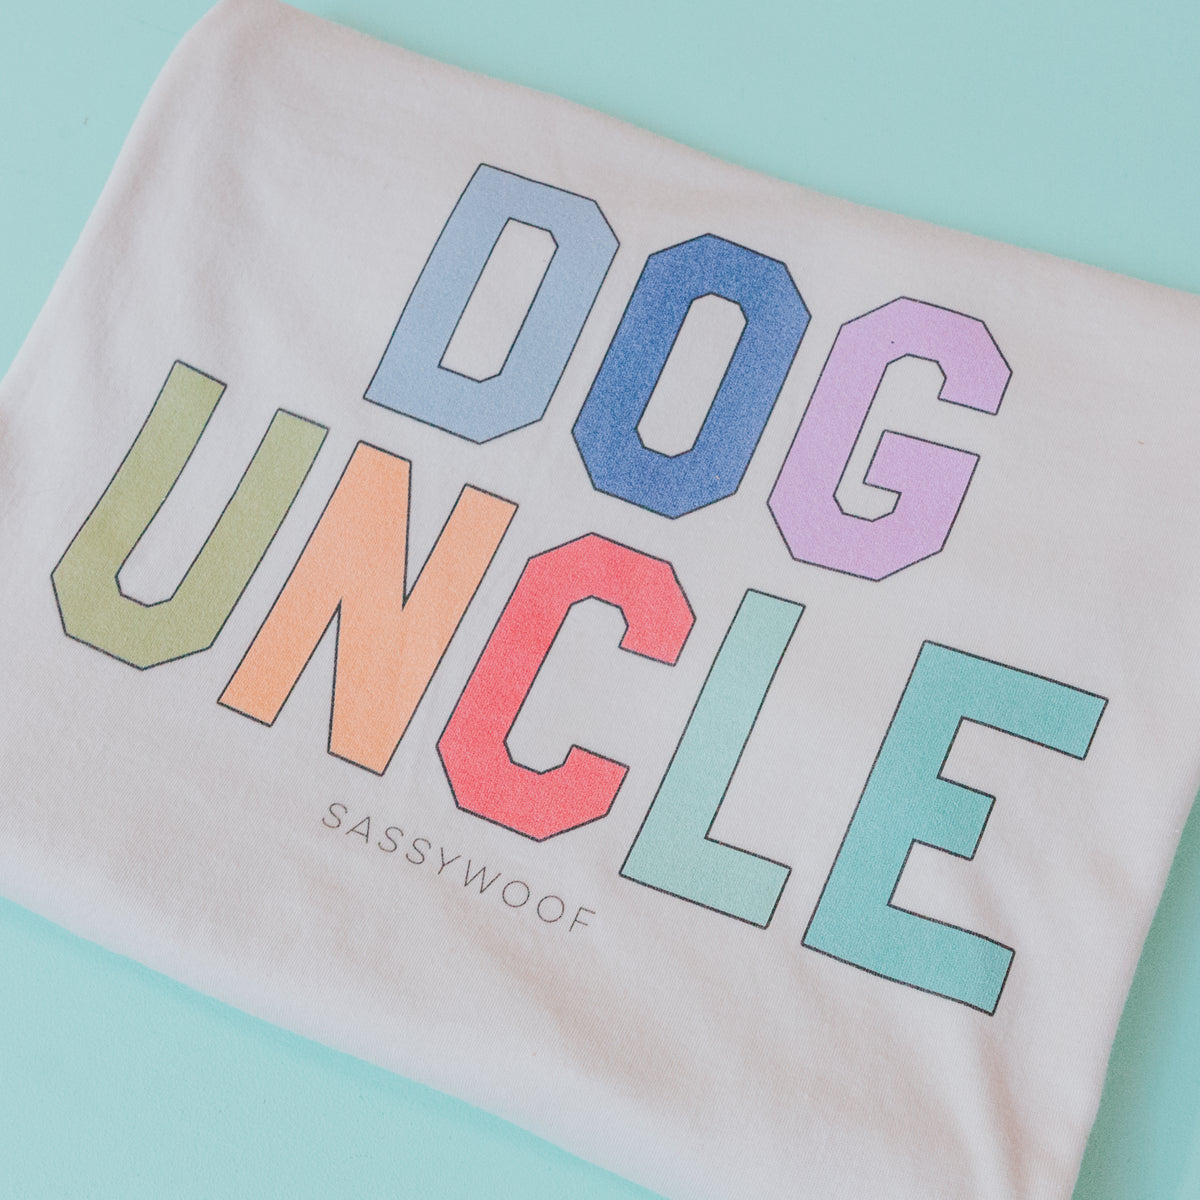 Family Tee - Dog Uncle